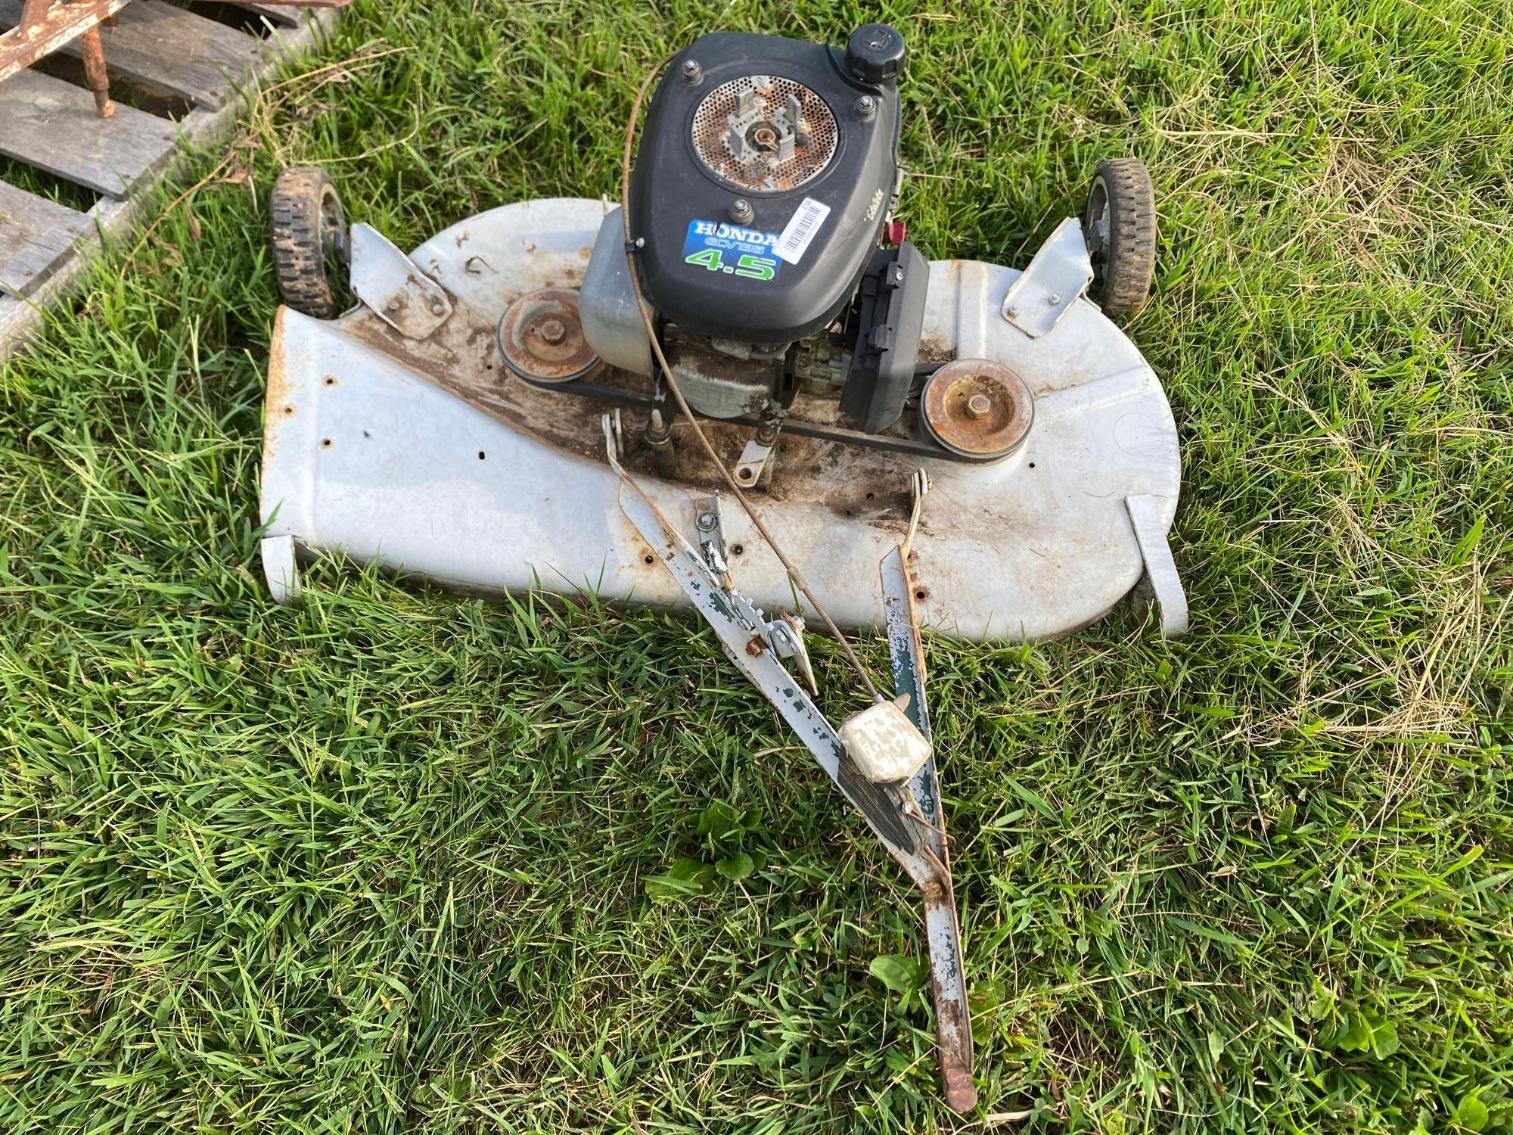 Image for Small Pull Behind Homemade Finish Mower, per seller- needs tune up